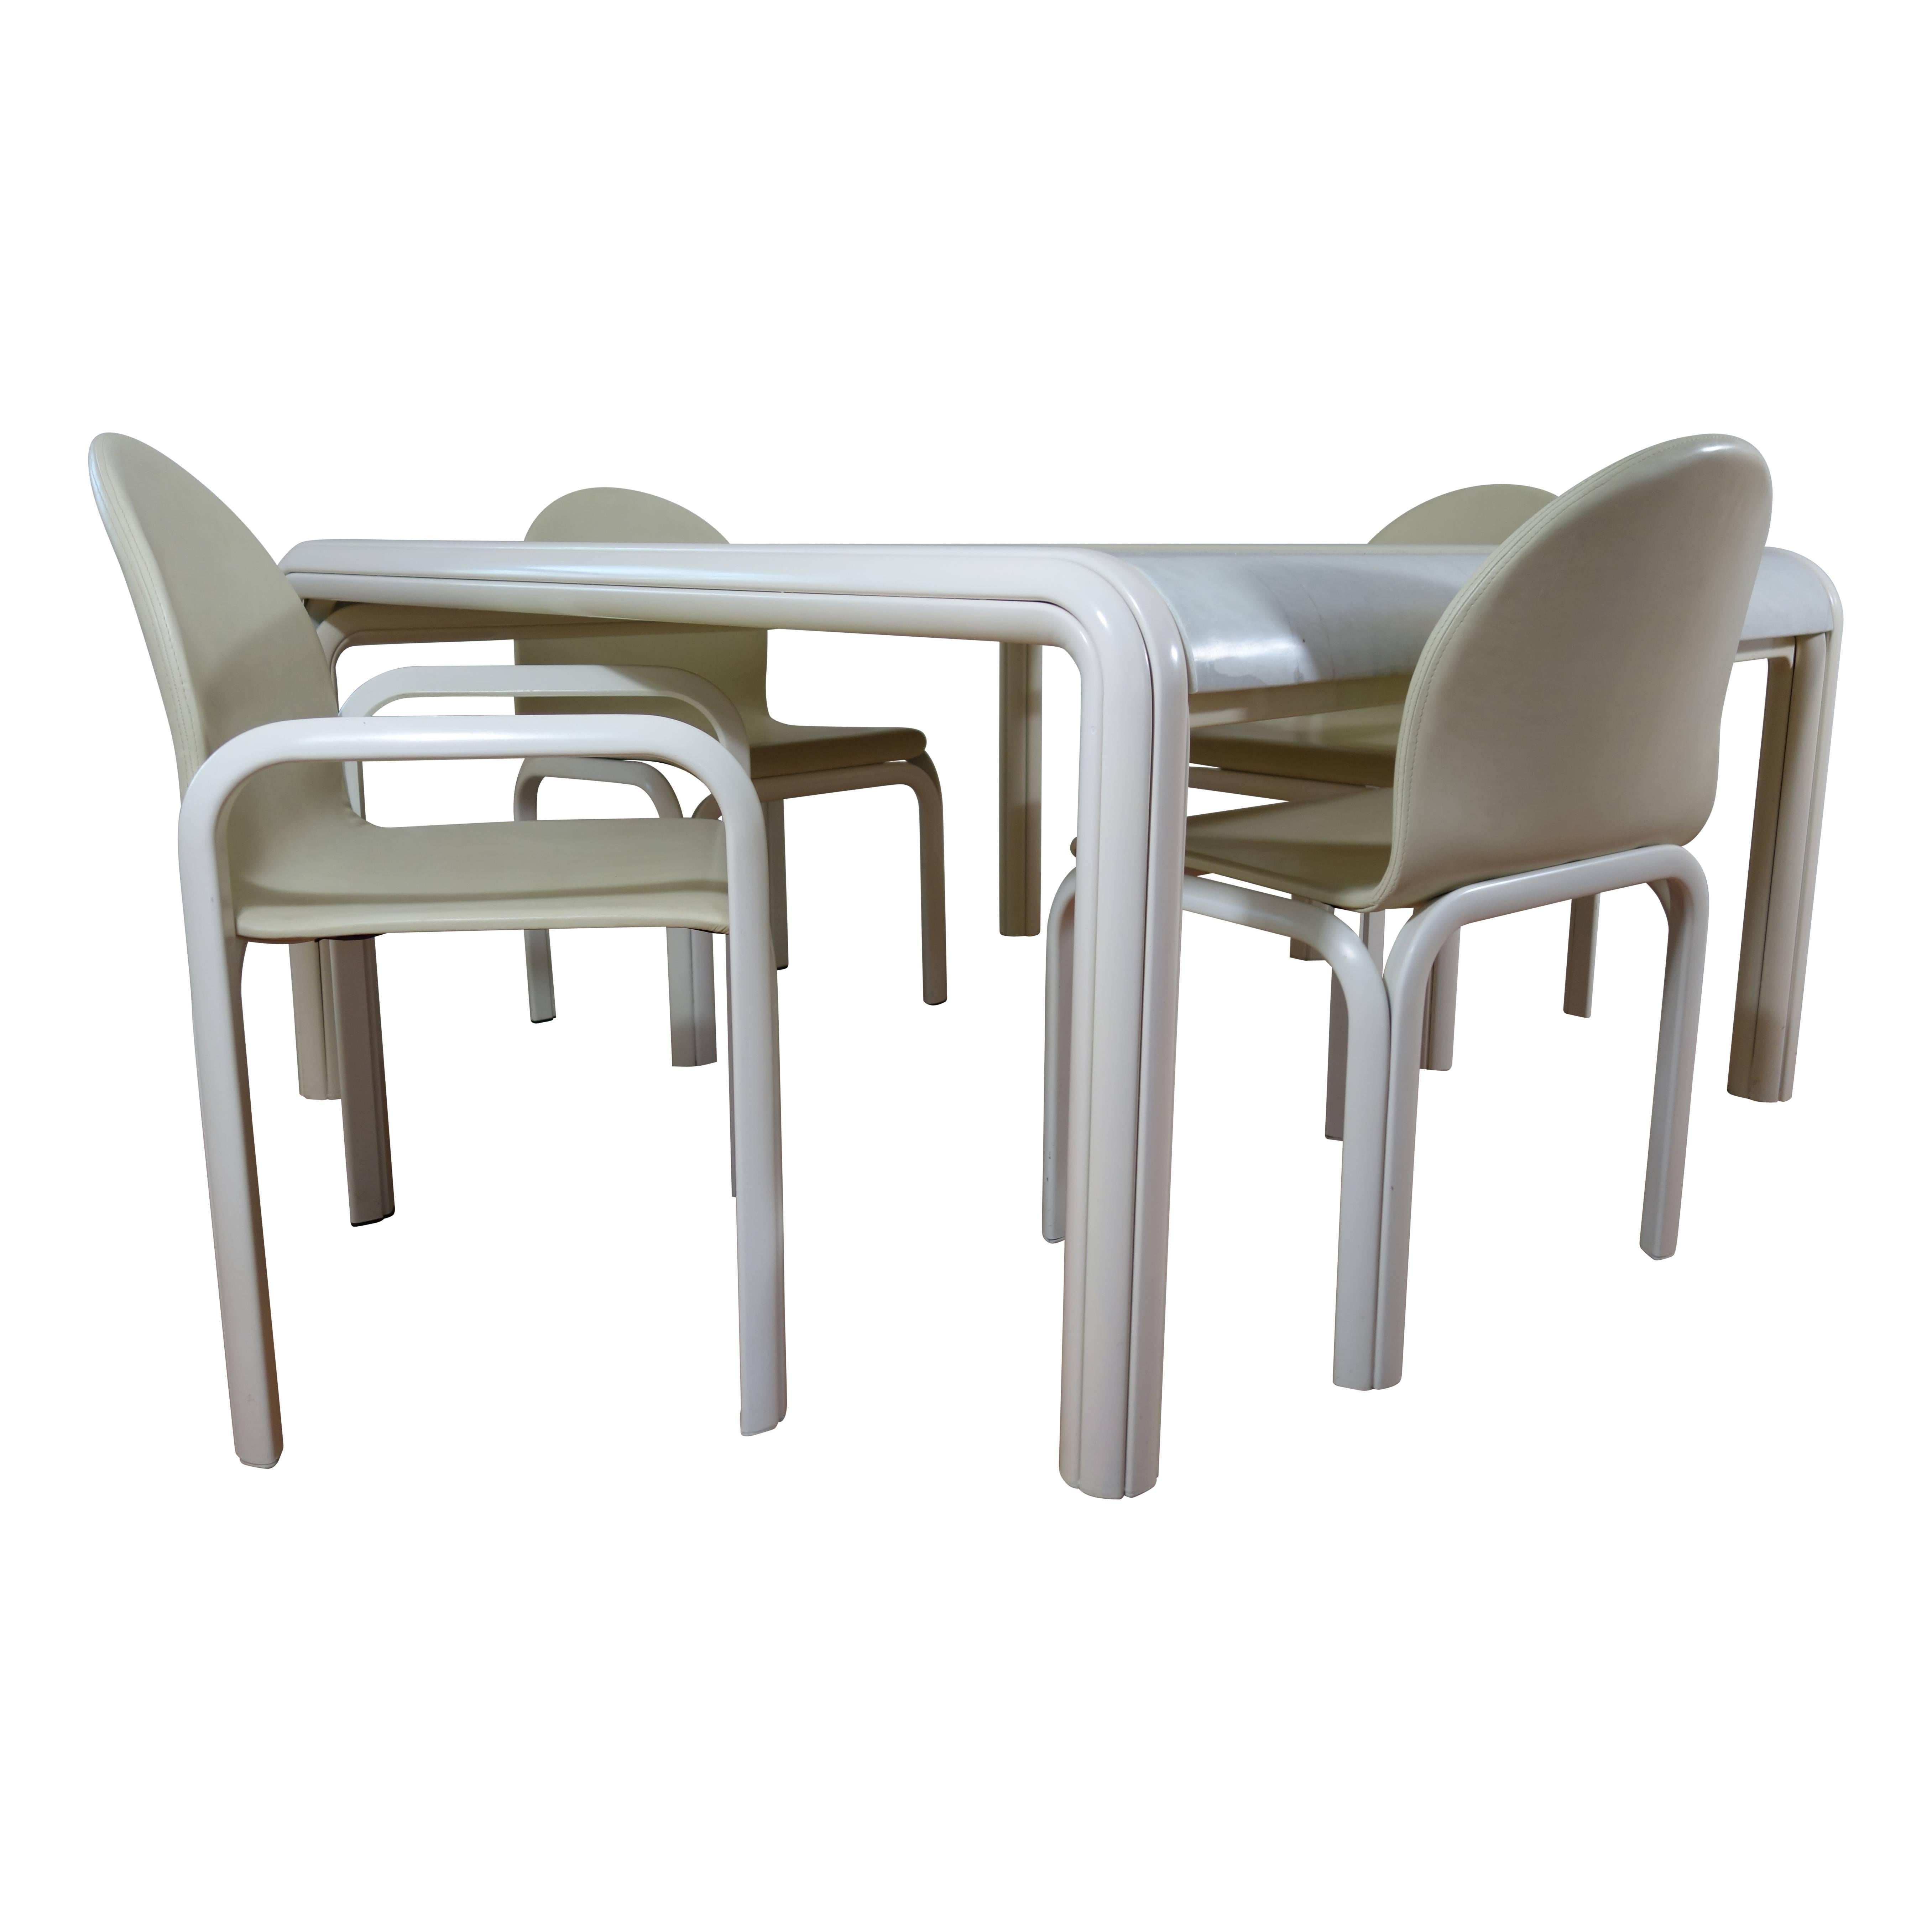 Midcentury Dining Set Orsay designed by Gae Aulenti for Knoll International